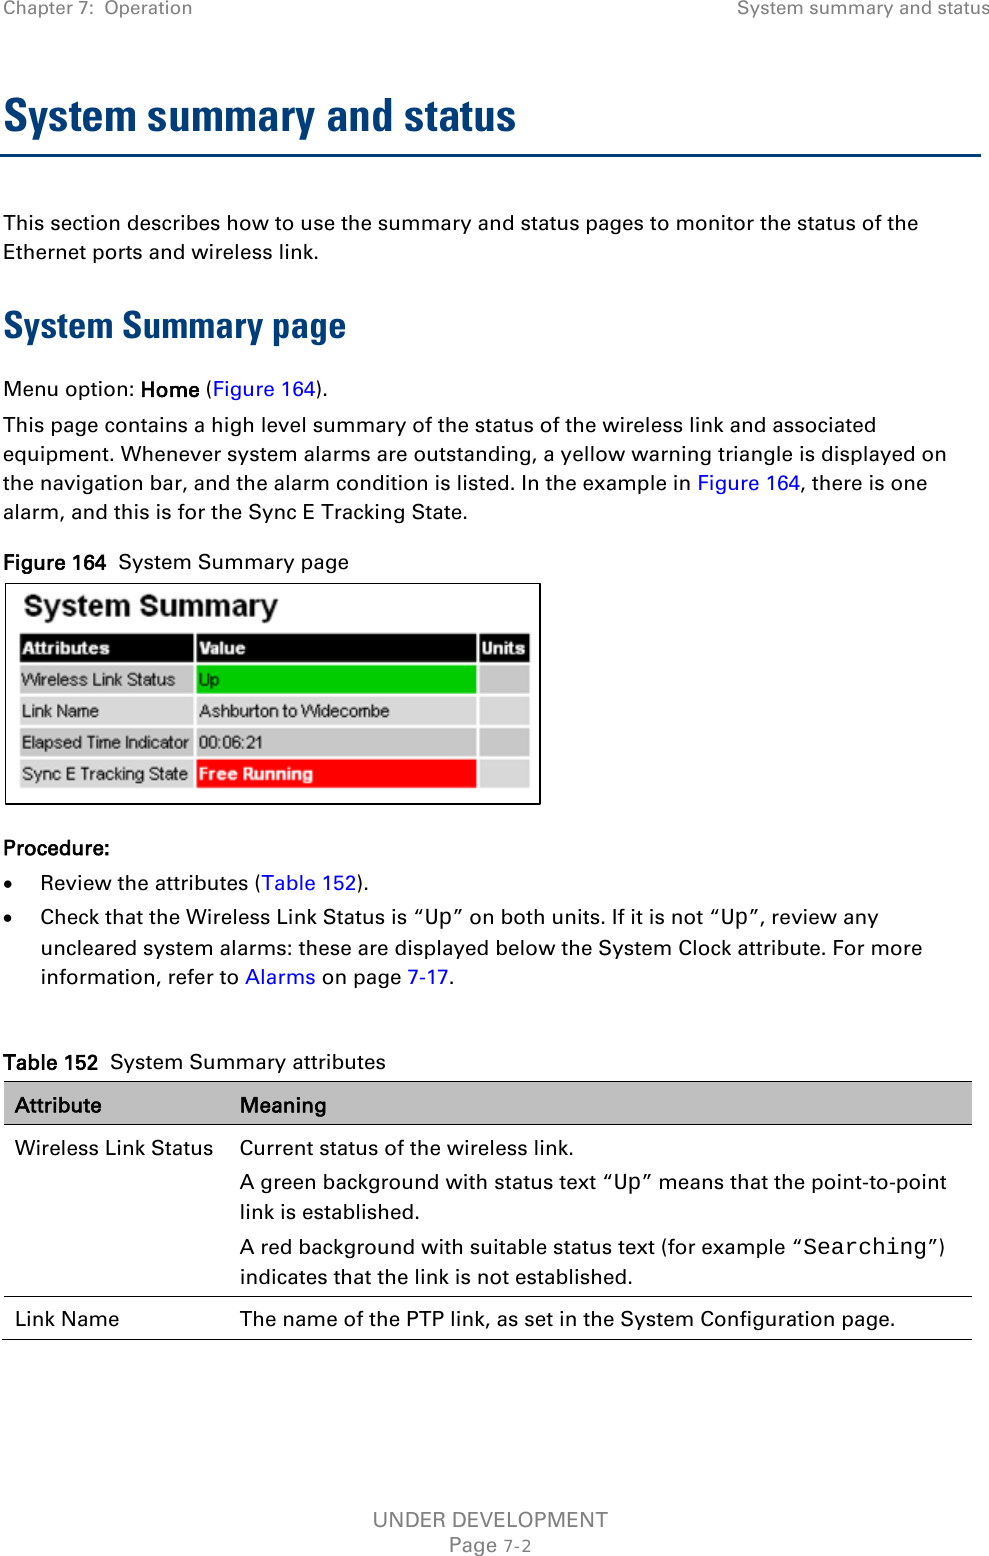 Chapter 7:  Operation System summary and status  System summary and status This section describes how to use the summary and status pages to monitor the status of the Ethernet ports and wireless link. System Summary page Menu option: Home (Figure 164). This page contains a high level summary of the status of the wireless link and associated equipment. Whenever system alarms are outstanding, a yellow warning triangle is displayed on the navigation bar, and the alarm condition is listed. In the example in Figure 164, there is one alarm, and this is for the Sync E Tracking State. Figure 164  System Summary page  Procedure: • Review the attributes (Table 152). • Check that the Wireless Link Status is “Up” on both units. If it is not “Up”, review any uncleared system alarms: these are displayed below the System Clock attribute. For more information, refer to Alarms on page 7-17.  Table 152  System Summary attributes Attribute Meaning Wireless Link Status Current status of the wireless link.  A green background with status text “Up” means that the point-to-point link is established. A red background with suitable status text (for example “Searching”) indicates that the link is not established.  Link Name The name of the PTP link, as set in the System Configuration page.  UNDER DEVELOPMENT Page 7-2 